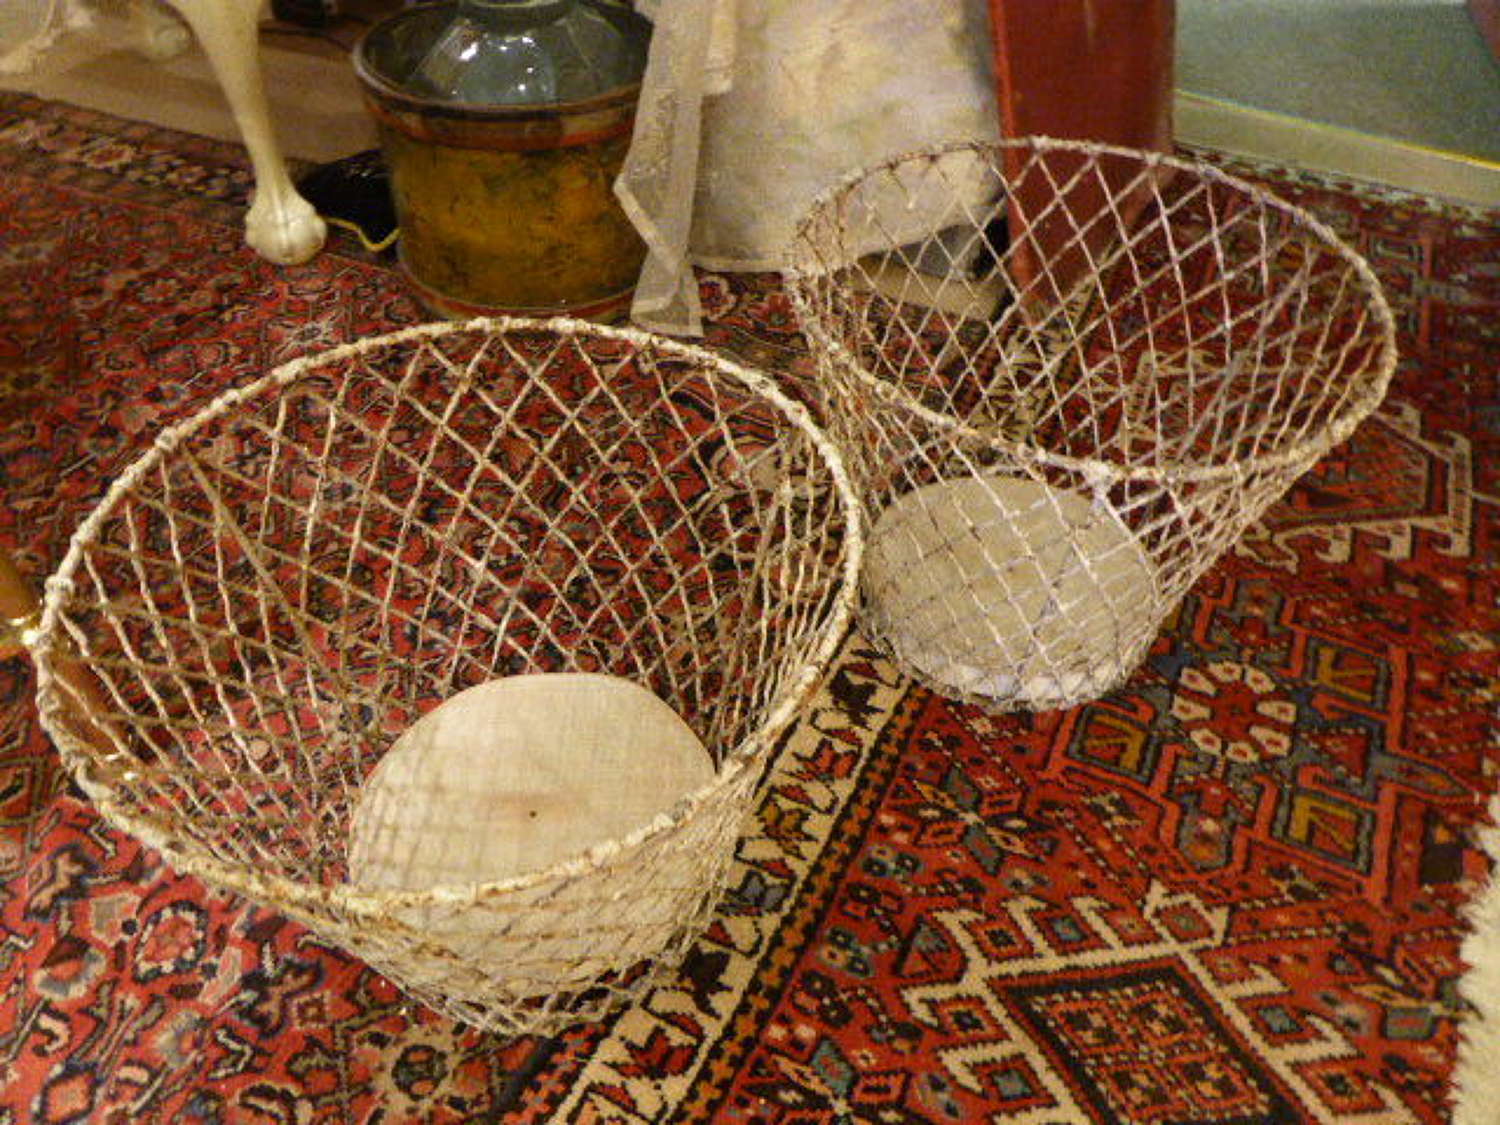 Victorian French painted wire baskets